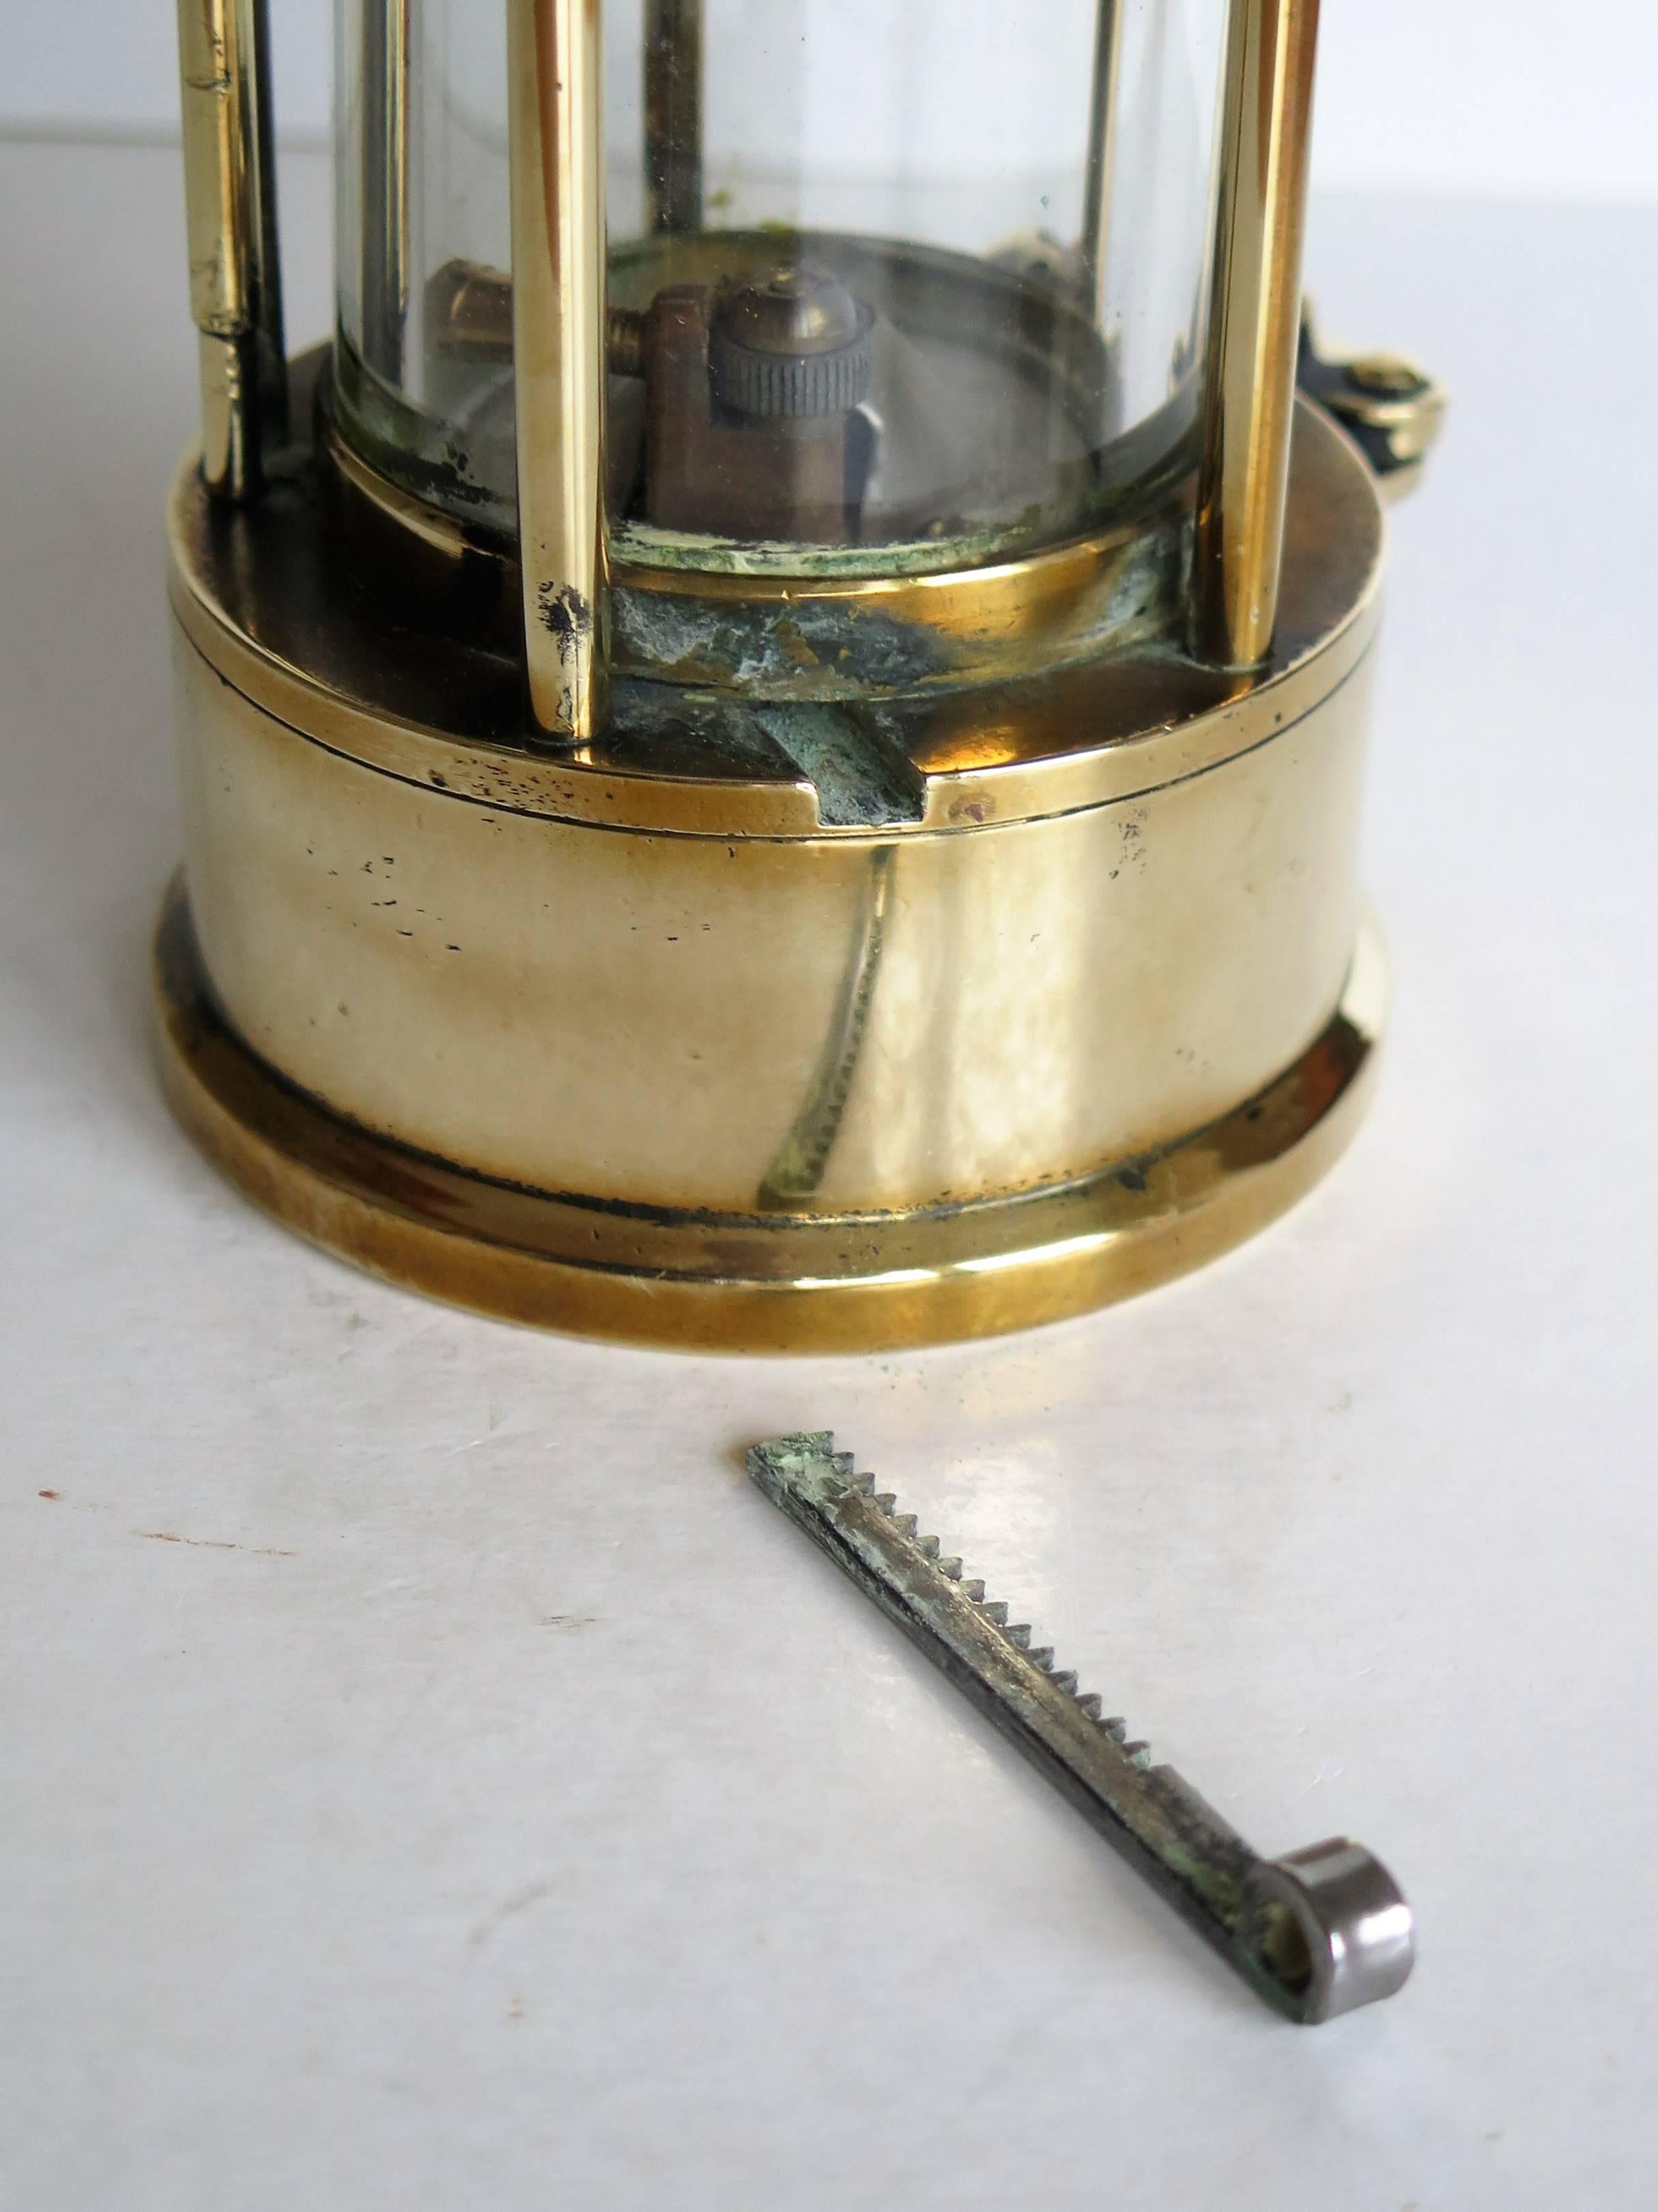 20th Century Miner's Lamp All Brass Eccles Type 6 Protector Lamp & Lighting Co, Circa 1930